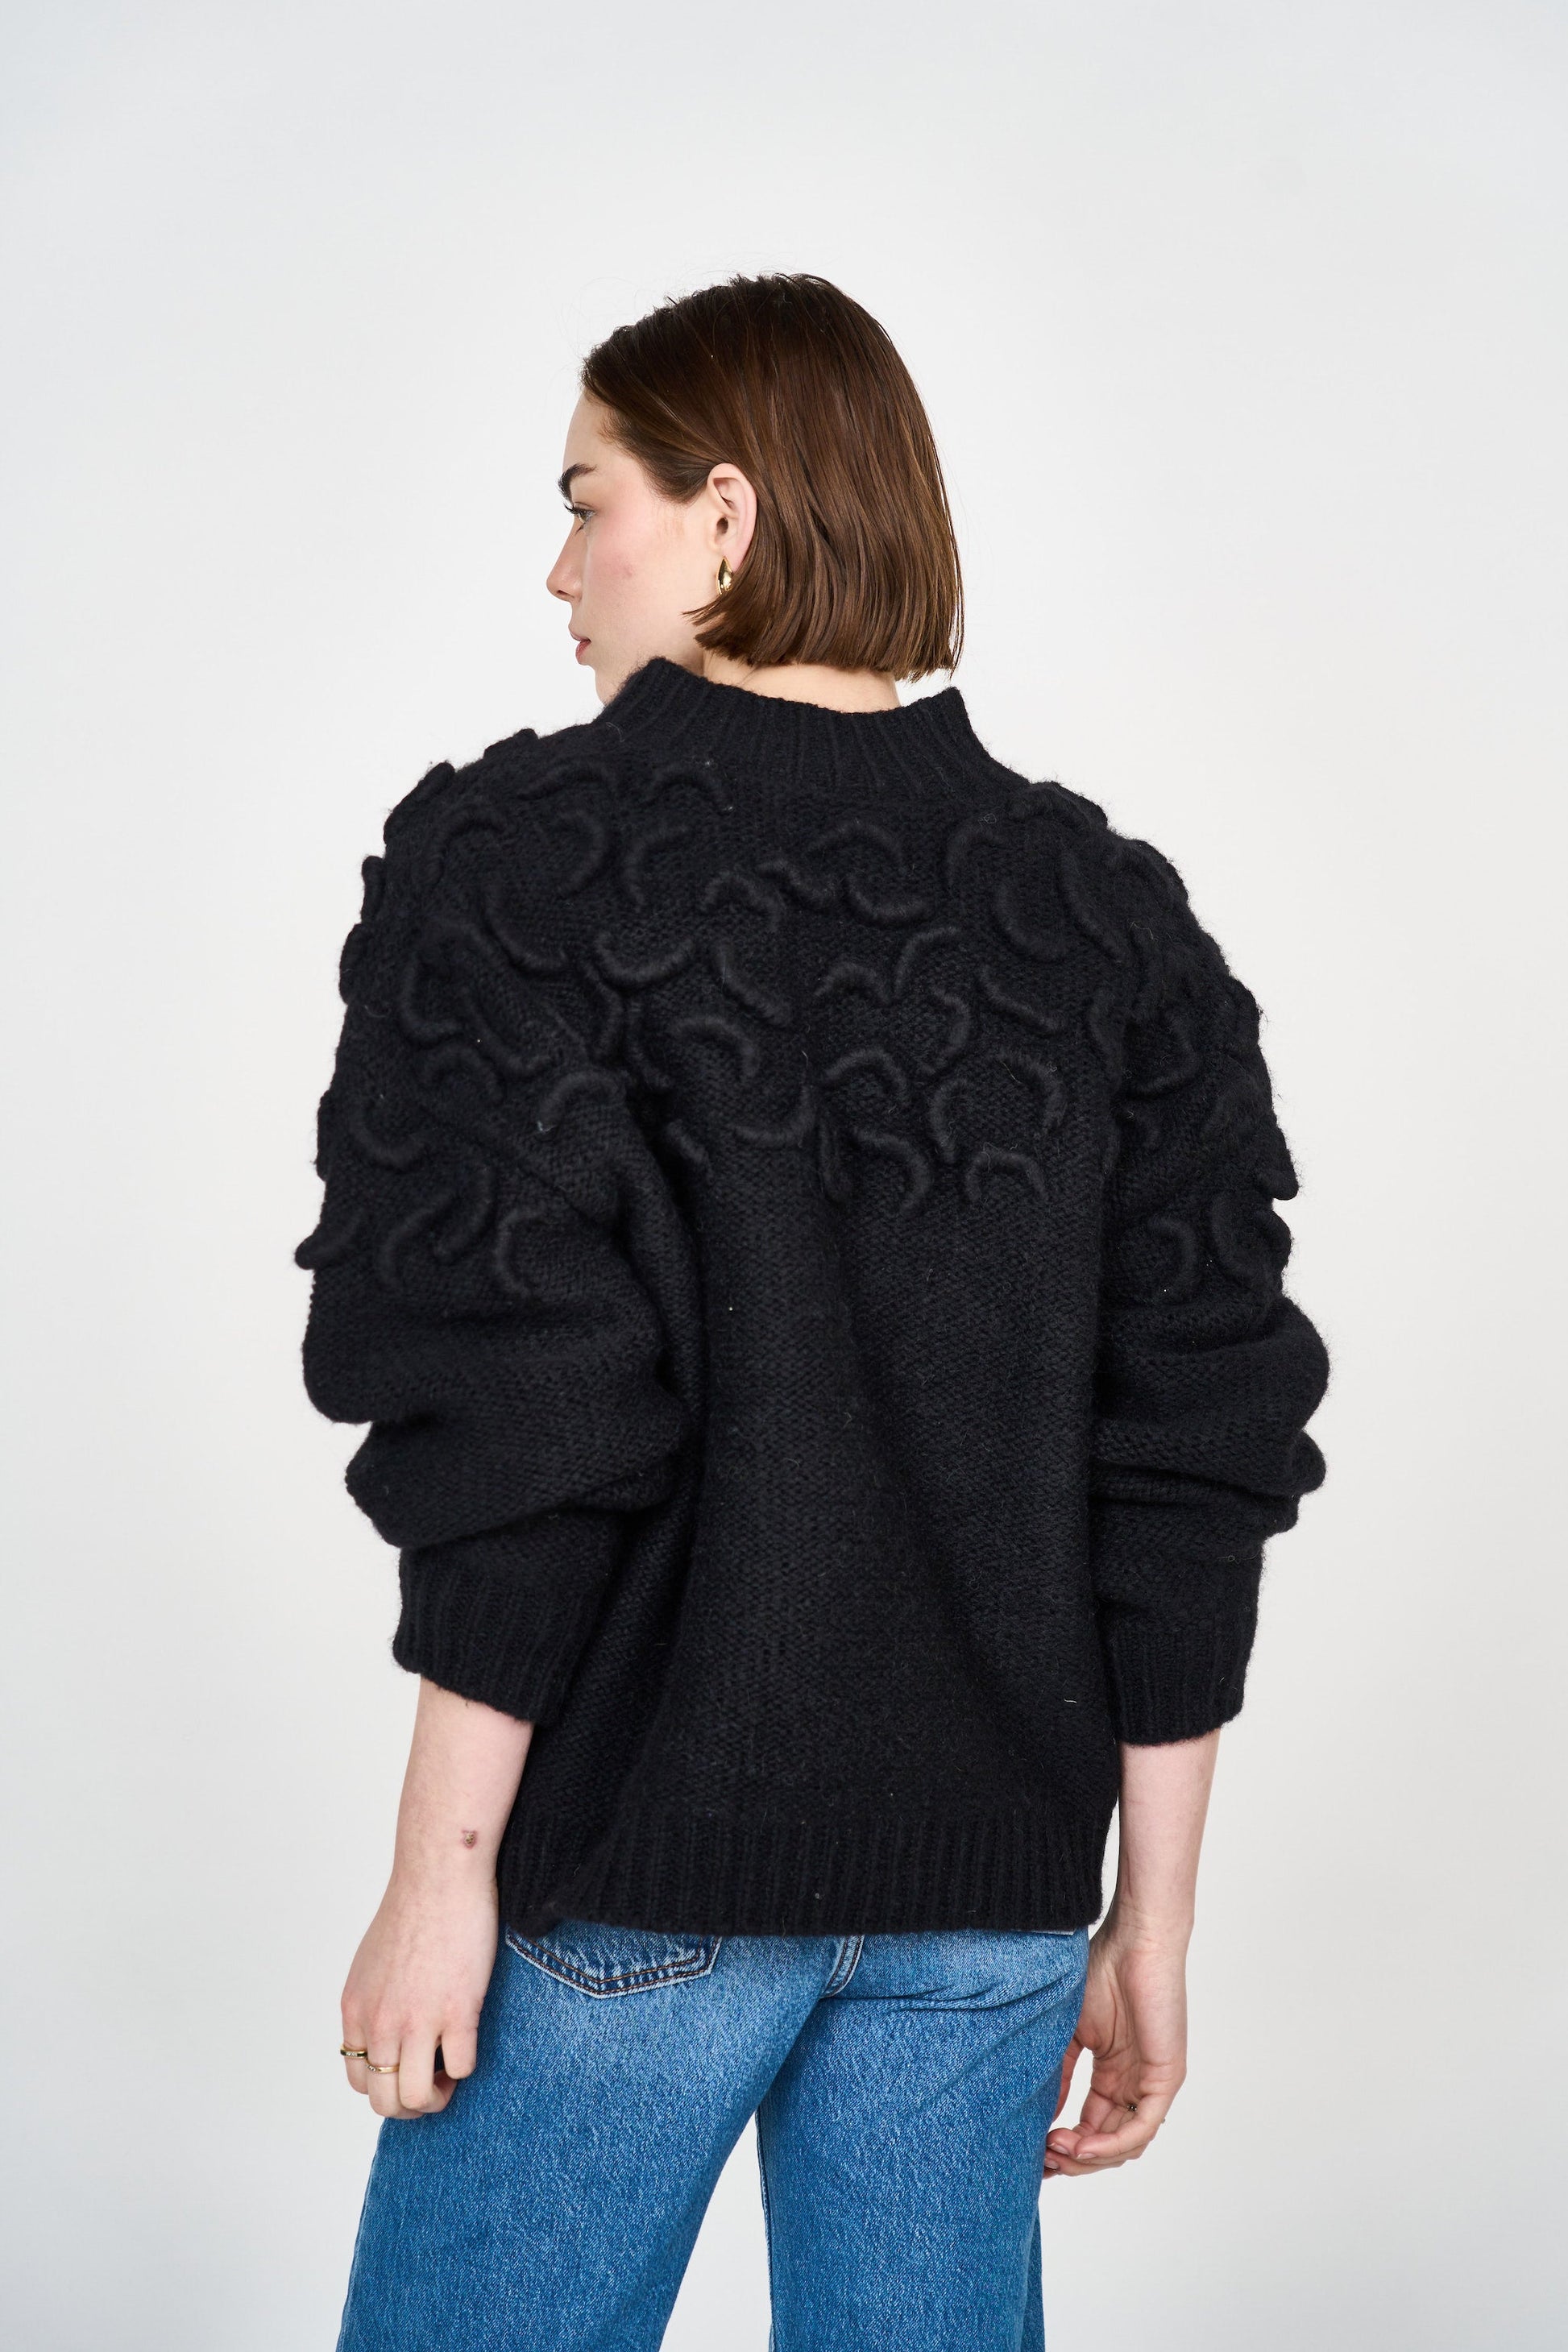 Mirth Cusco Cardigan in Black - A cozy winter cardigan featuring hand embroidered detailing on the shoulders. Designed to layer, this is the one we think your closet needs most. Handmade in India.